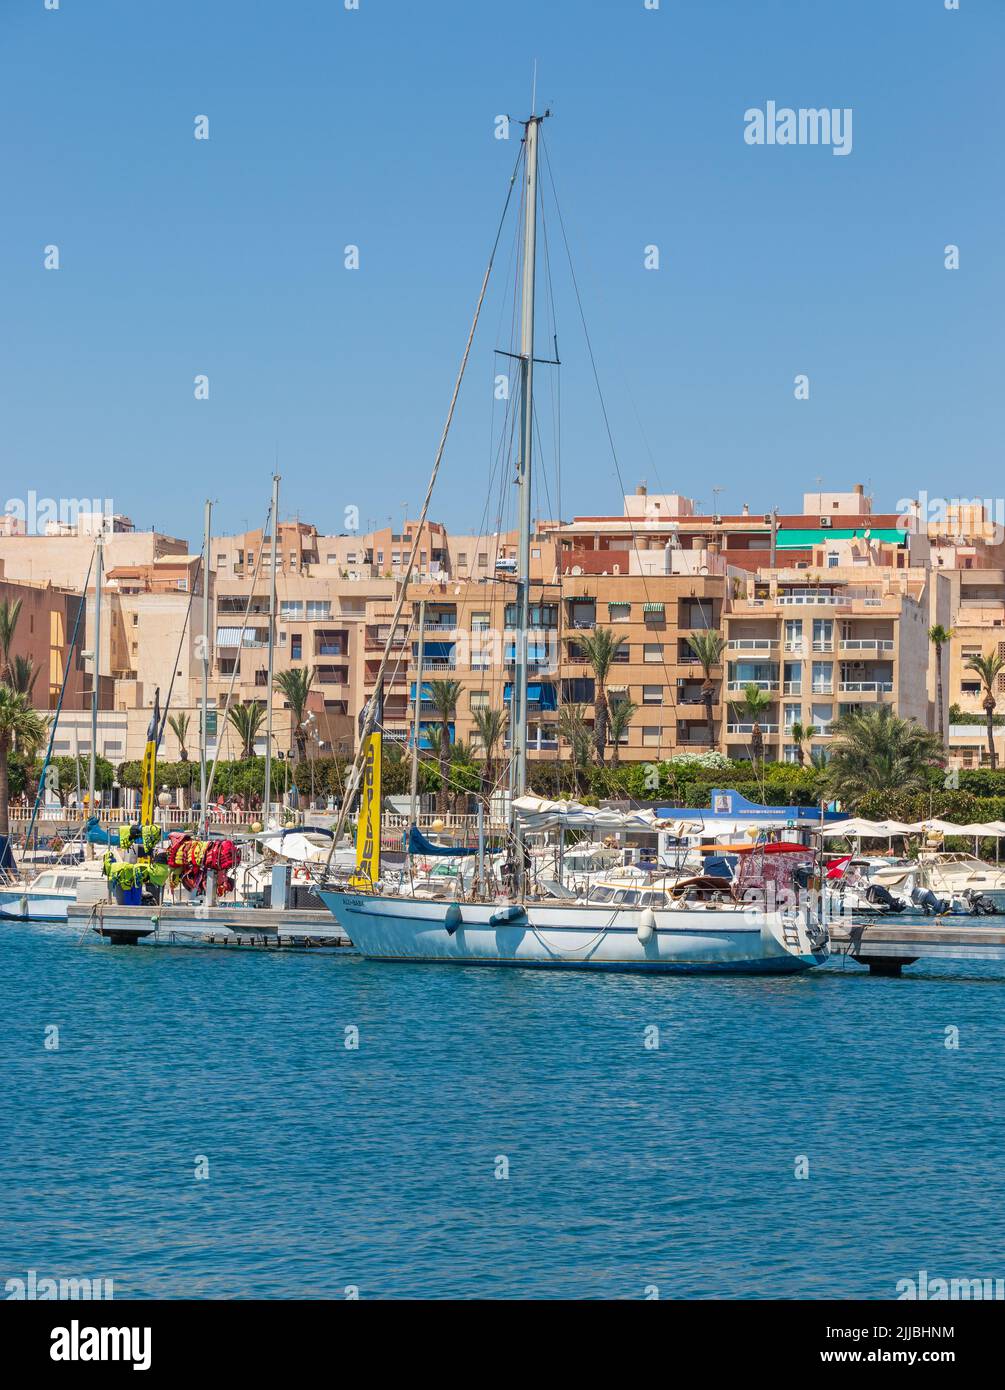 Leisure Boats Moored at the Marina in Garrucha Almeria province, Andalucía, Spain Stock Photo